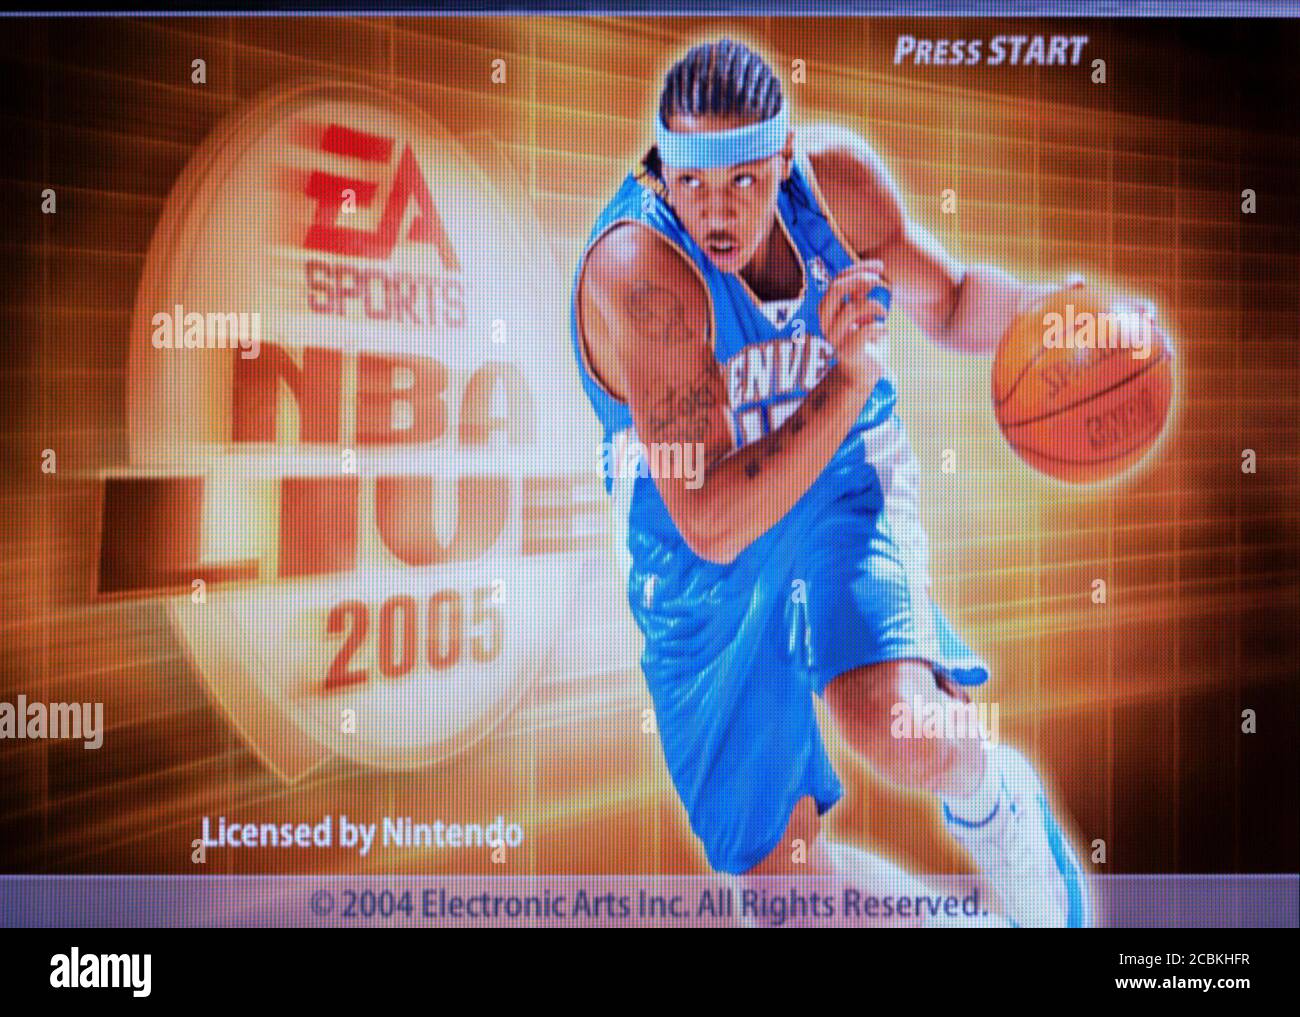 NBA Live 2005 - Nintendo Gamecube Videogame - Editorial use only Stock Photo